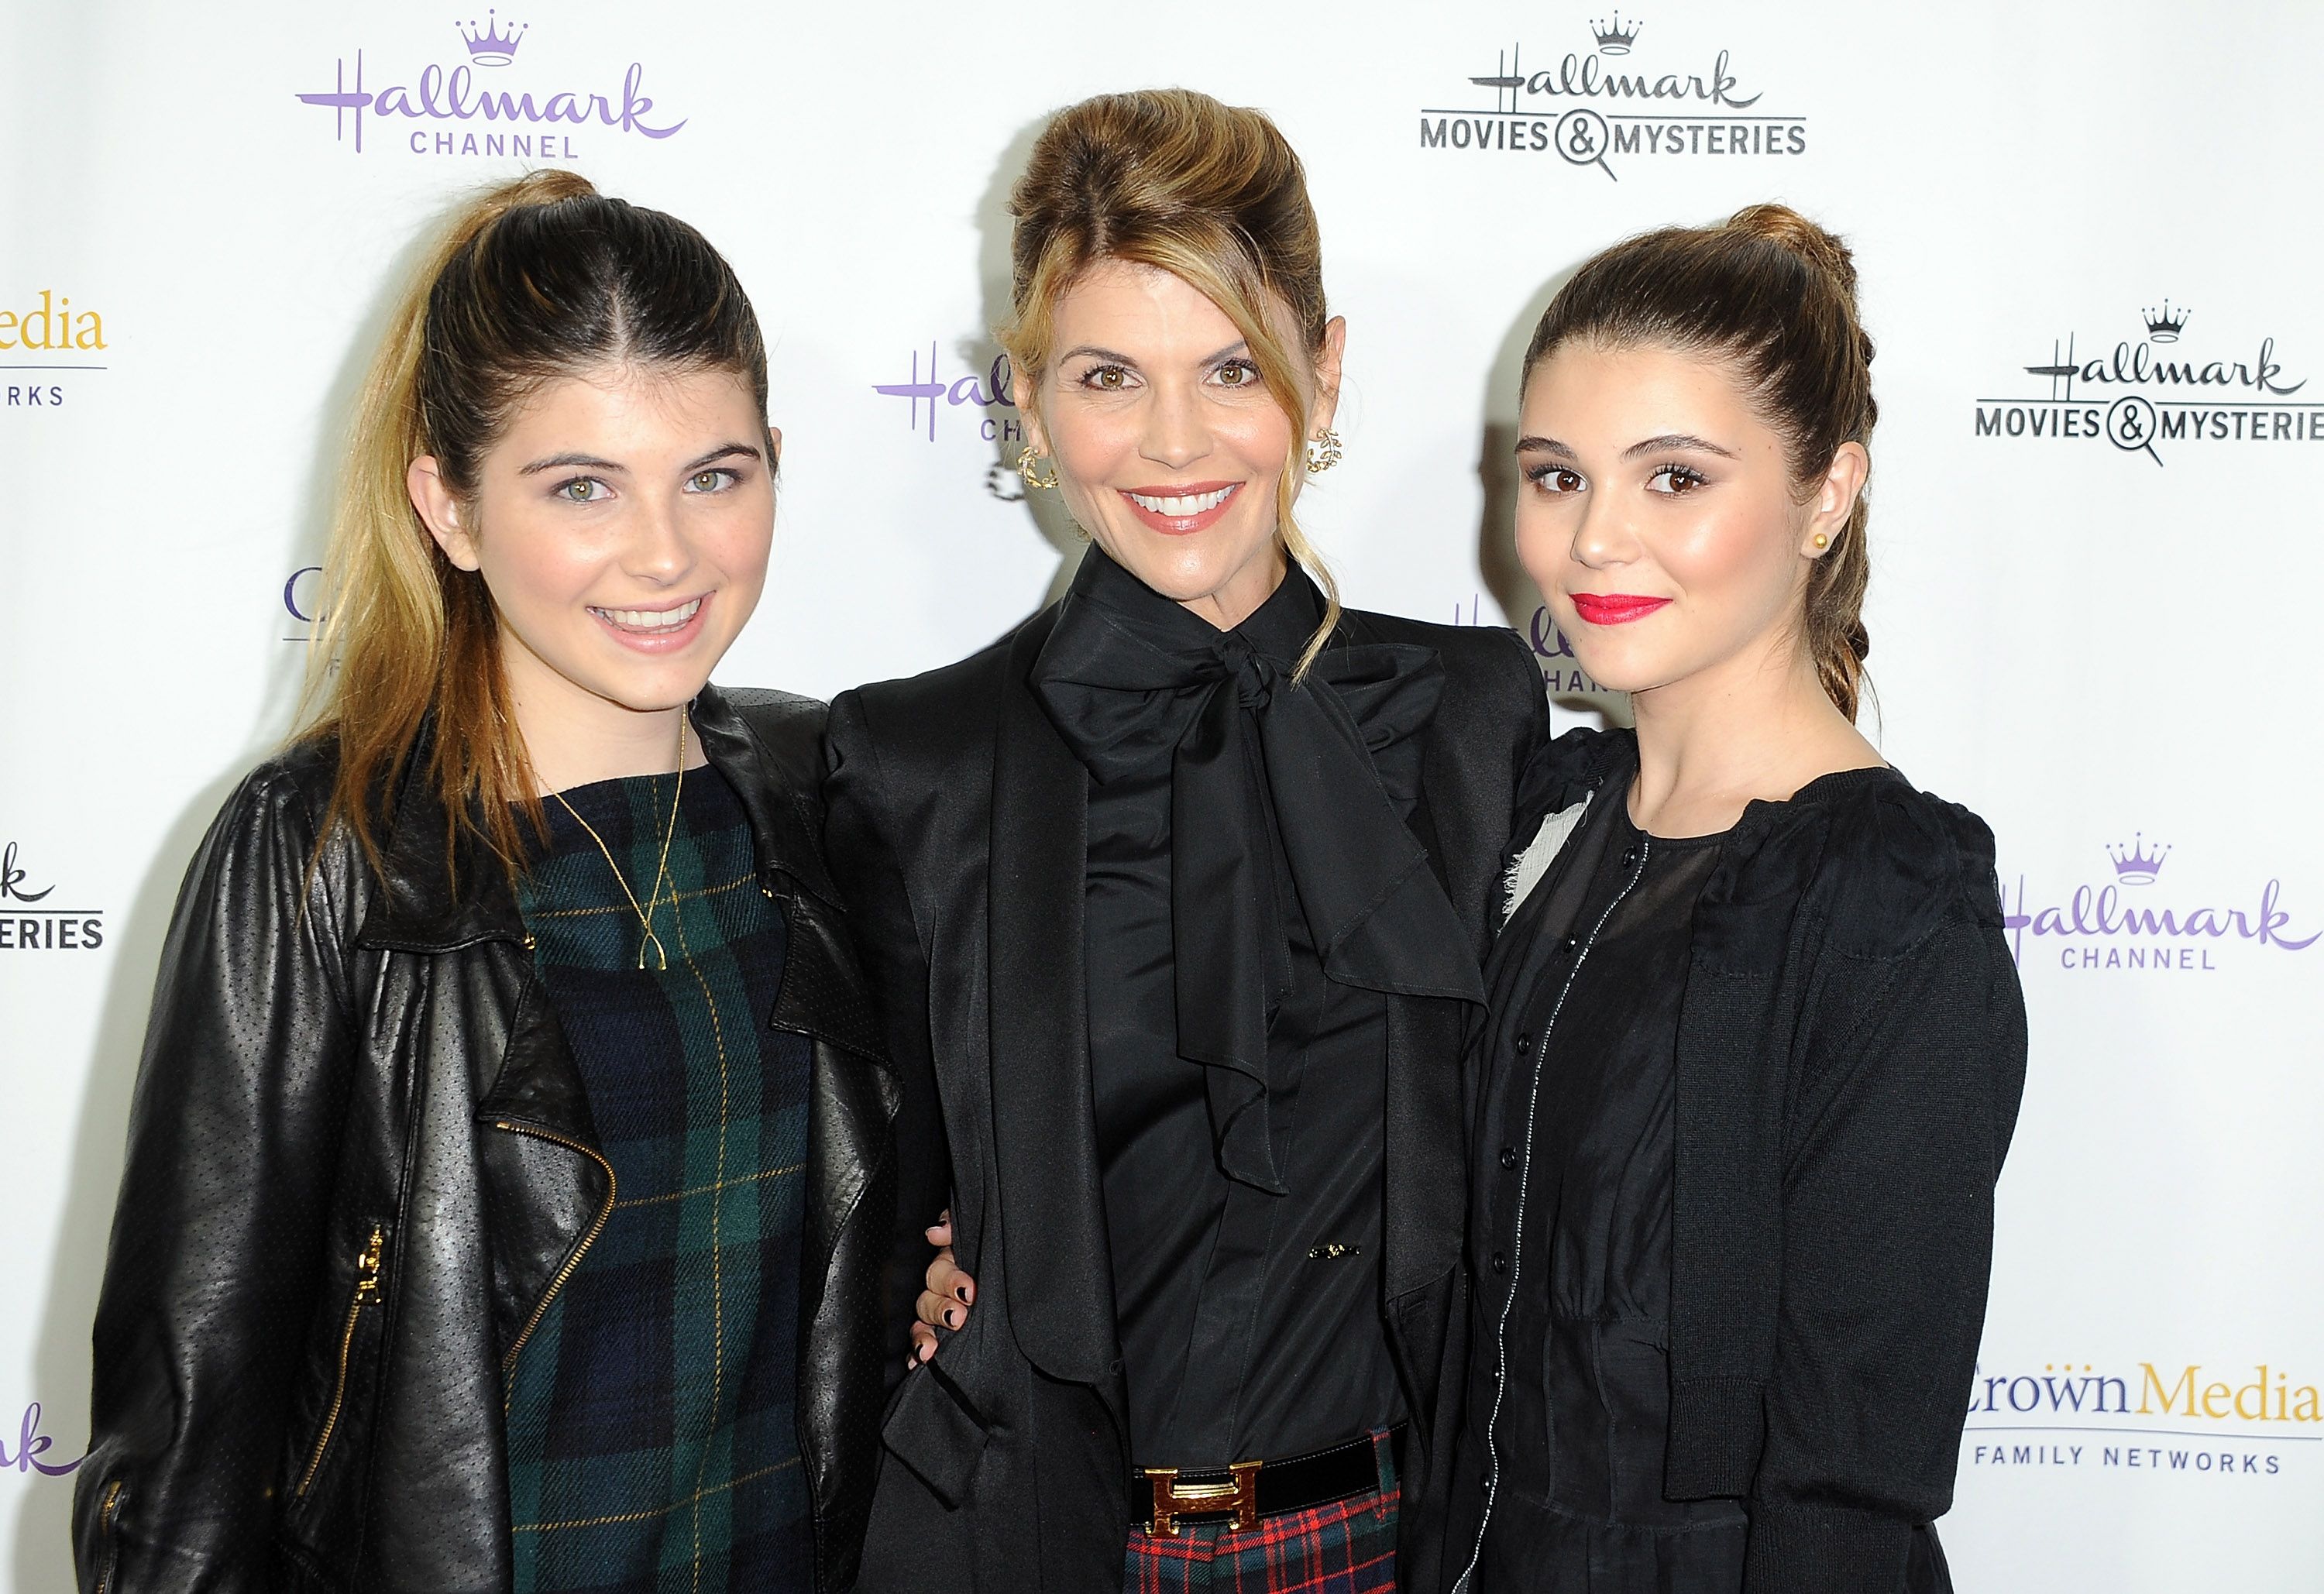 Isabella Giannulli, Lori Loughlin, and Olivia Giannulli at Hallmark Channel's annual holiday event premiere screening of "Northpole" on November 4, 2014. | Photo: Getty Images